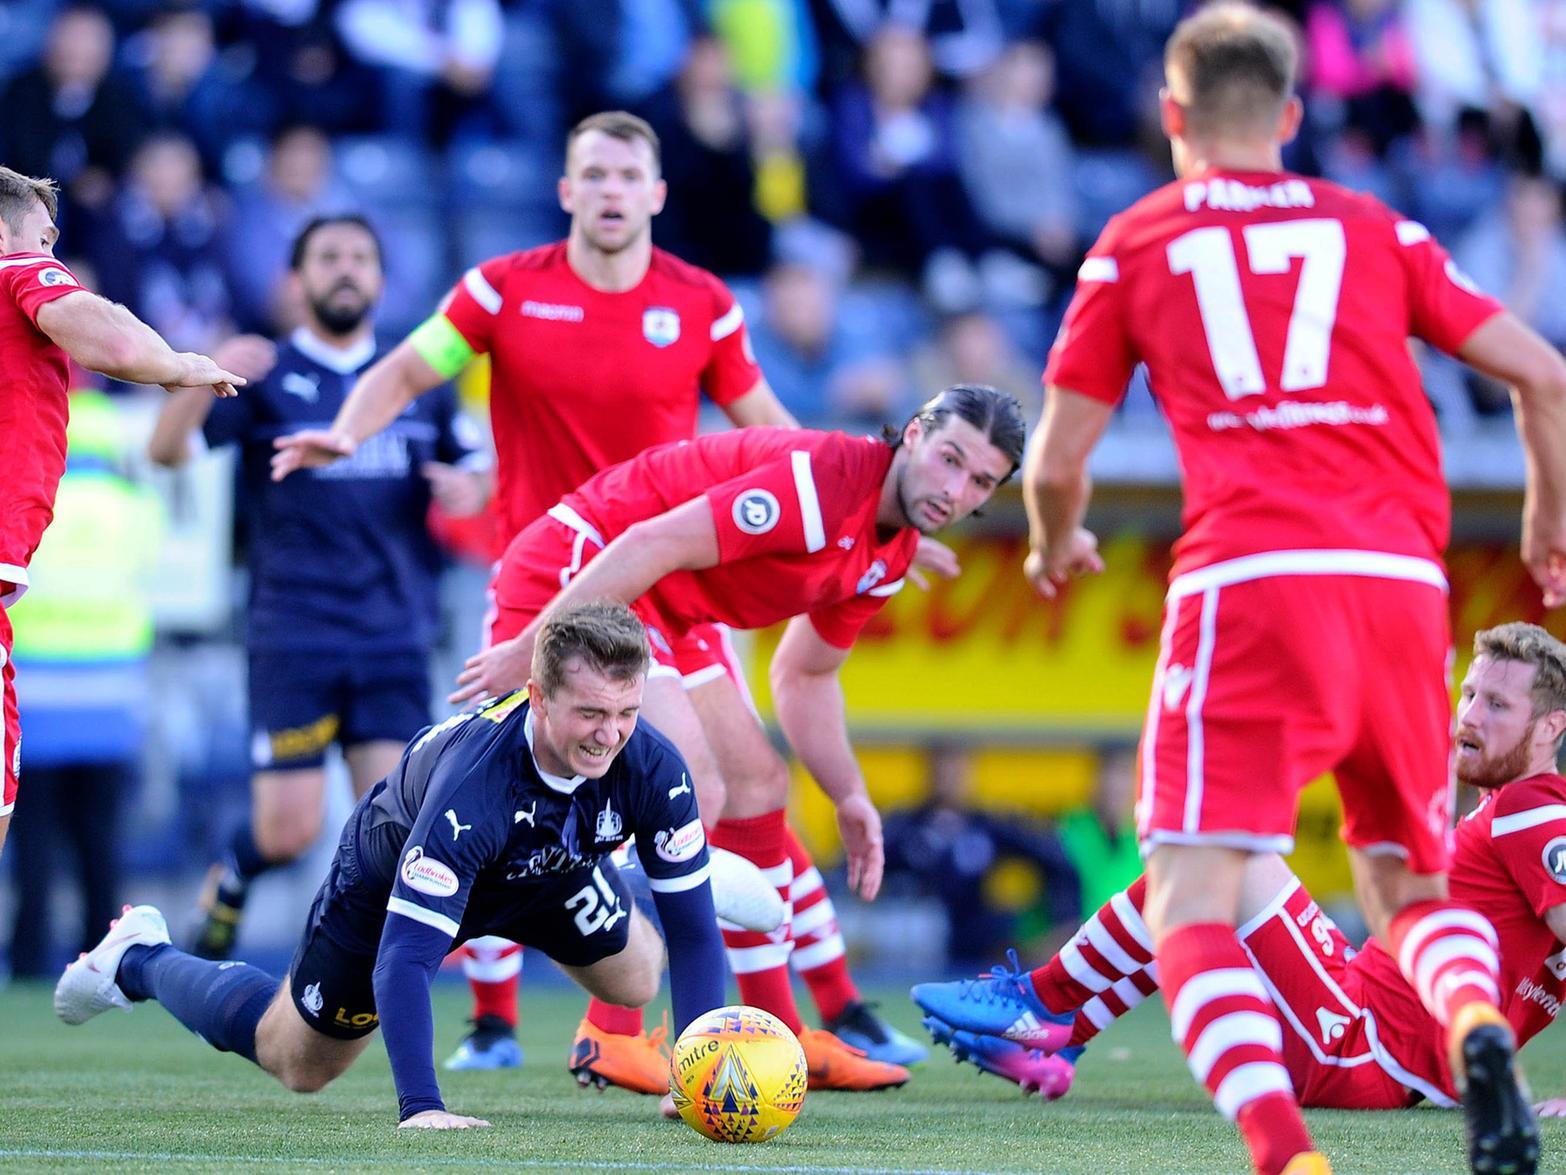 September 8, 2018. The then unknown Welsh side knocked a team of Paul Hartley's misfits out of the Irn-Bru Cup despite a change in manager.